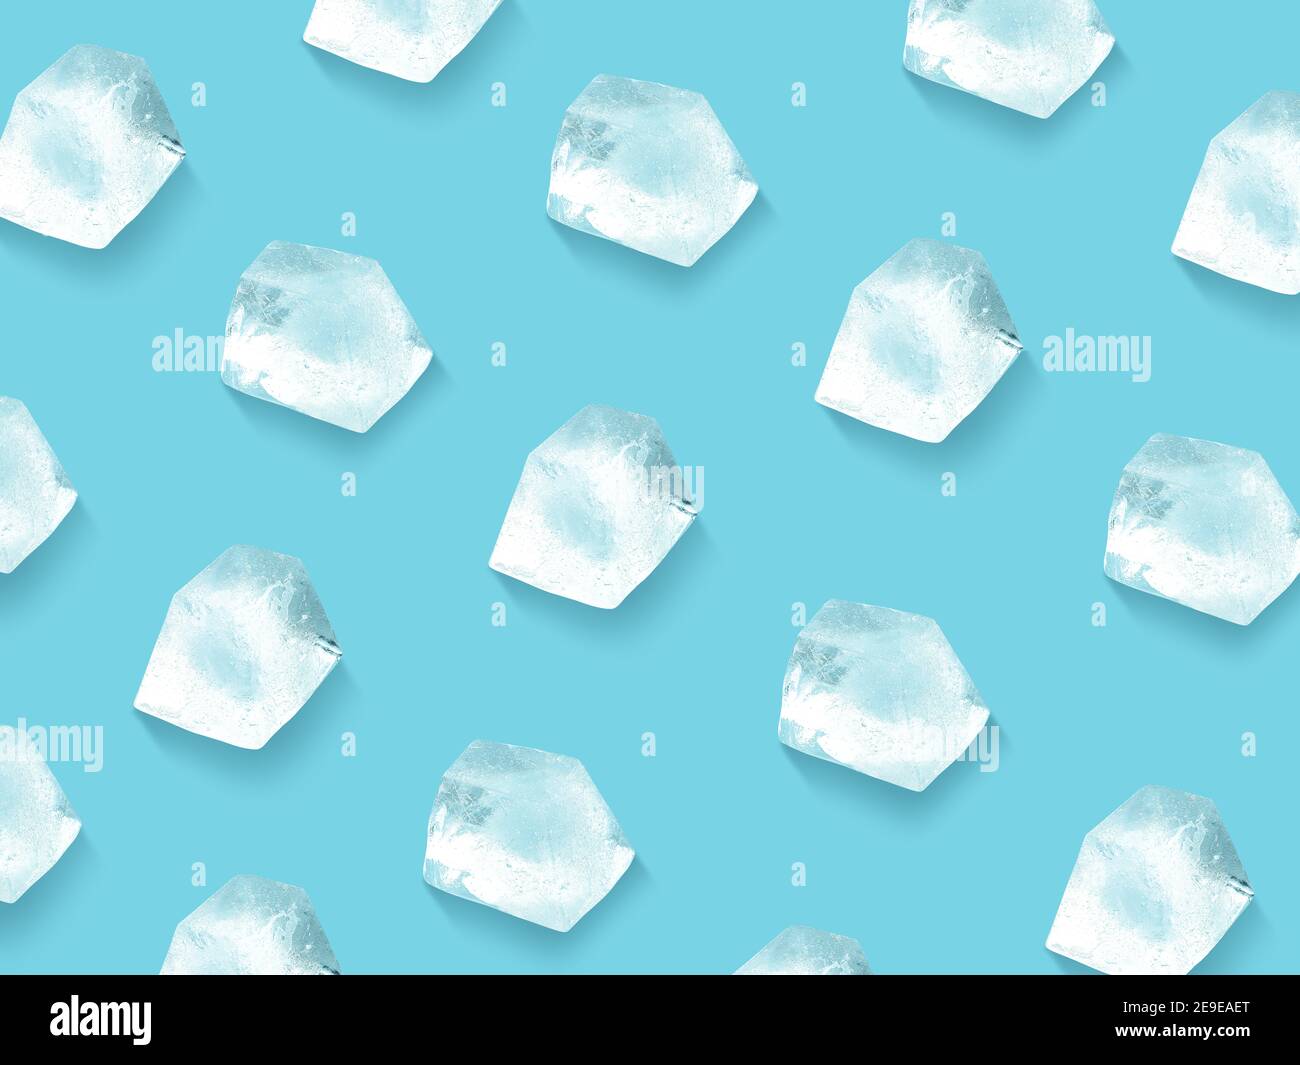 Ice cube pattern. Ice cubes with soft shadow on light blue background Stock Photo